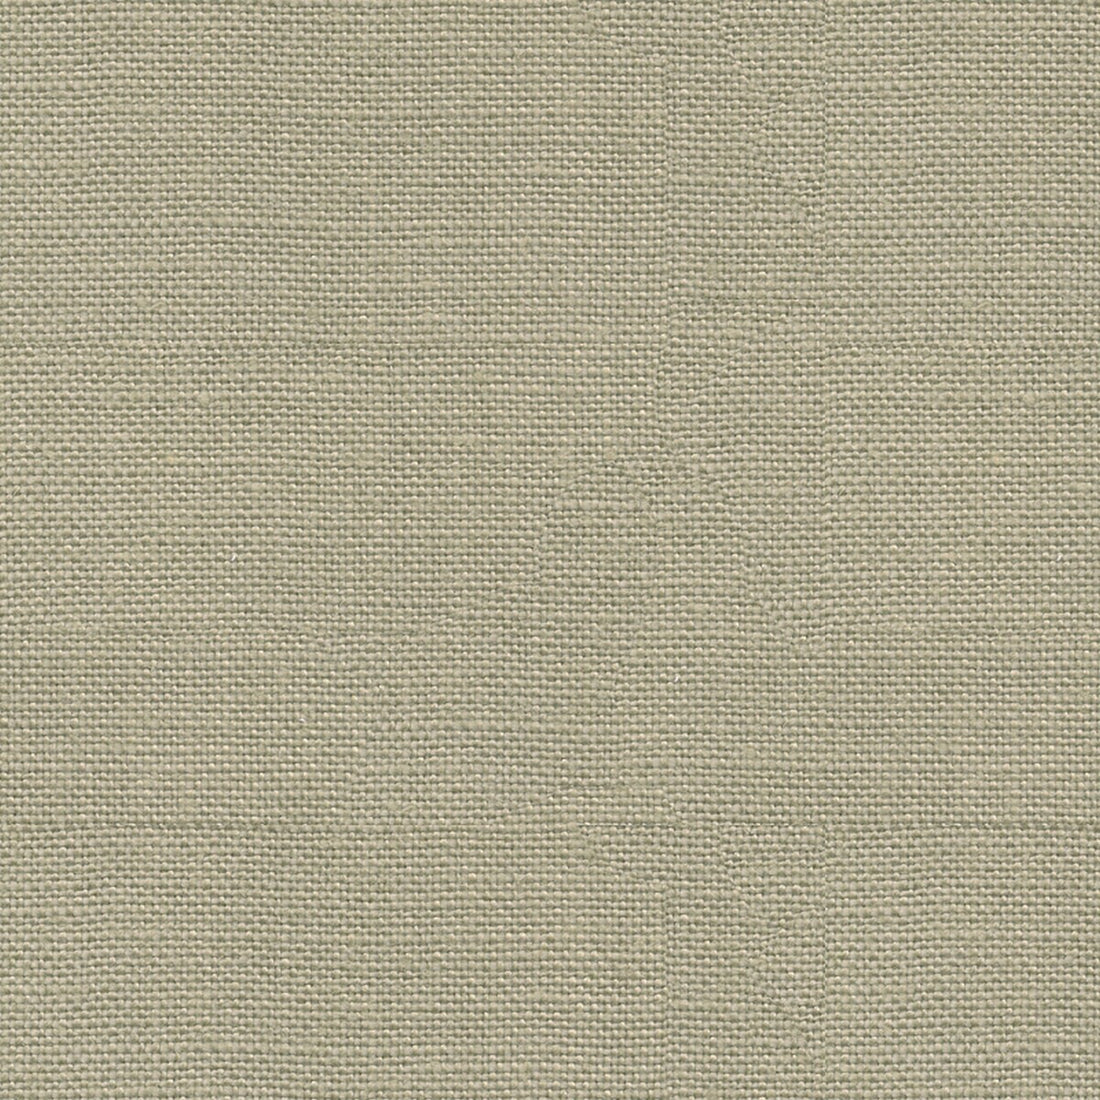 Lea fabric in dove grey color - pattern J0337.910.0 - by G P &amp; J Baker in the Crayford collection